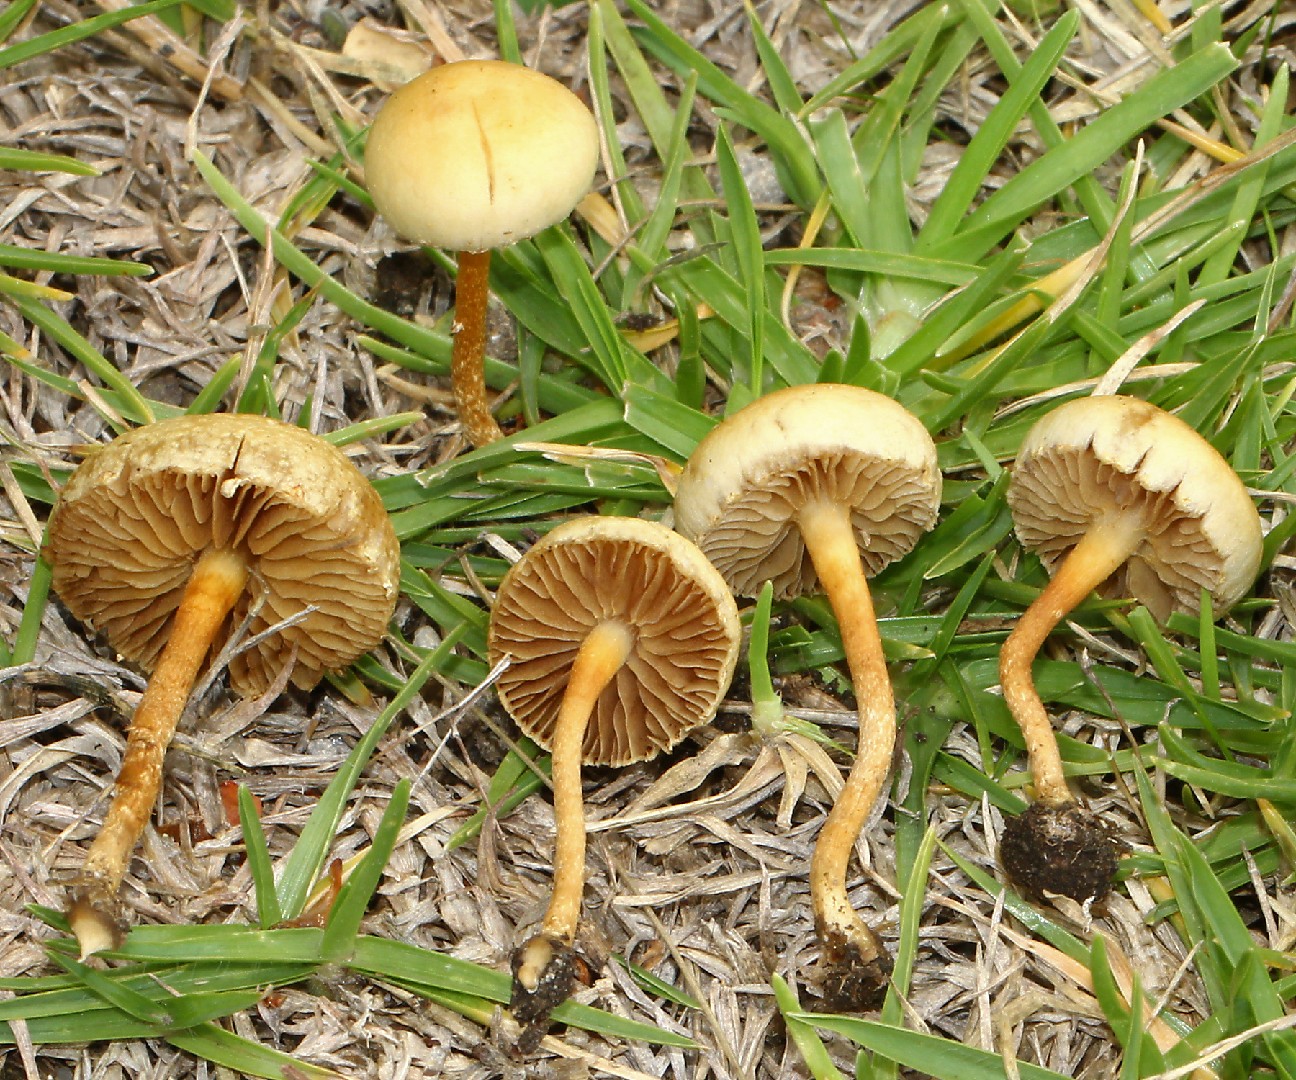 Agrocybe des pelouses (Agrocybe pediades)